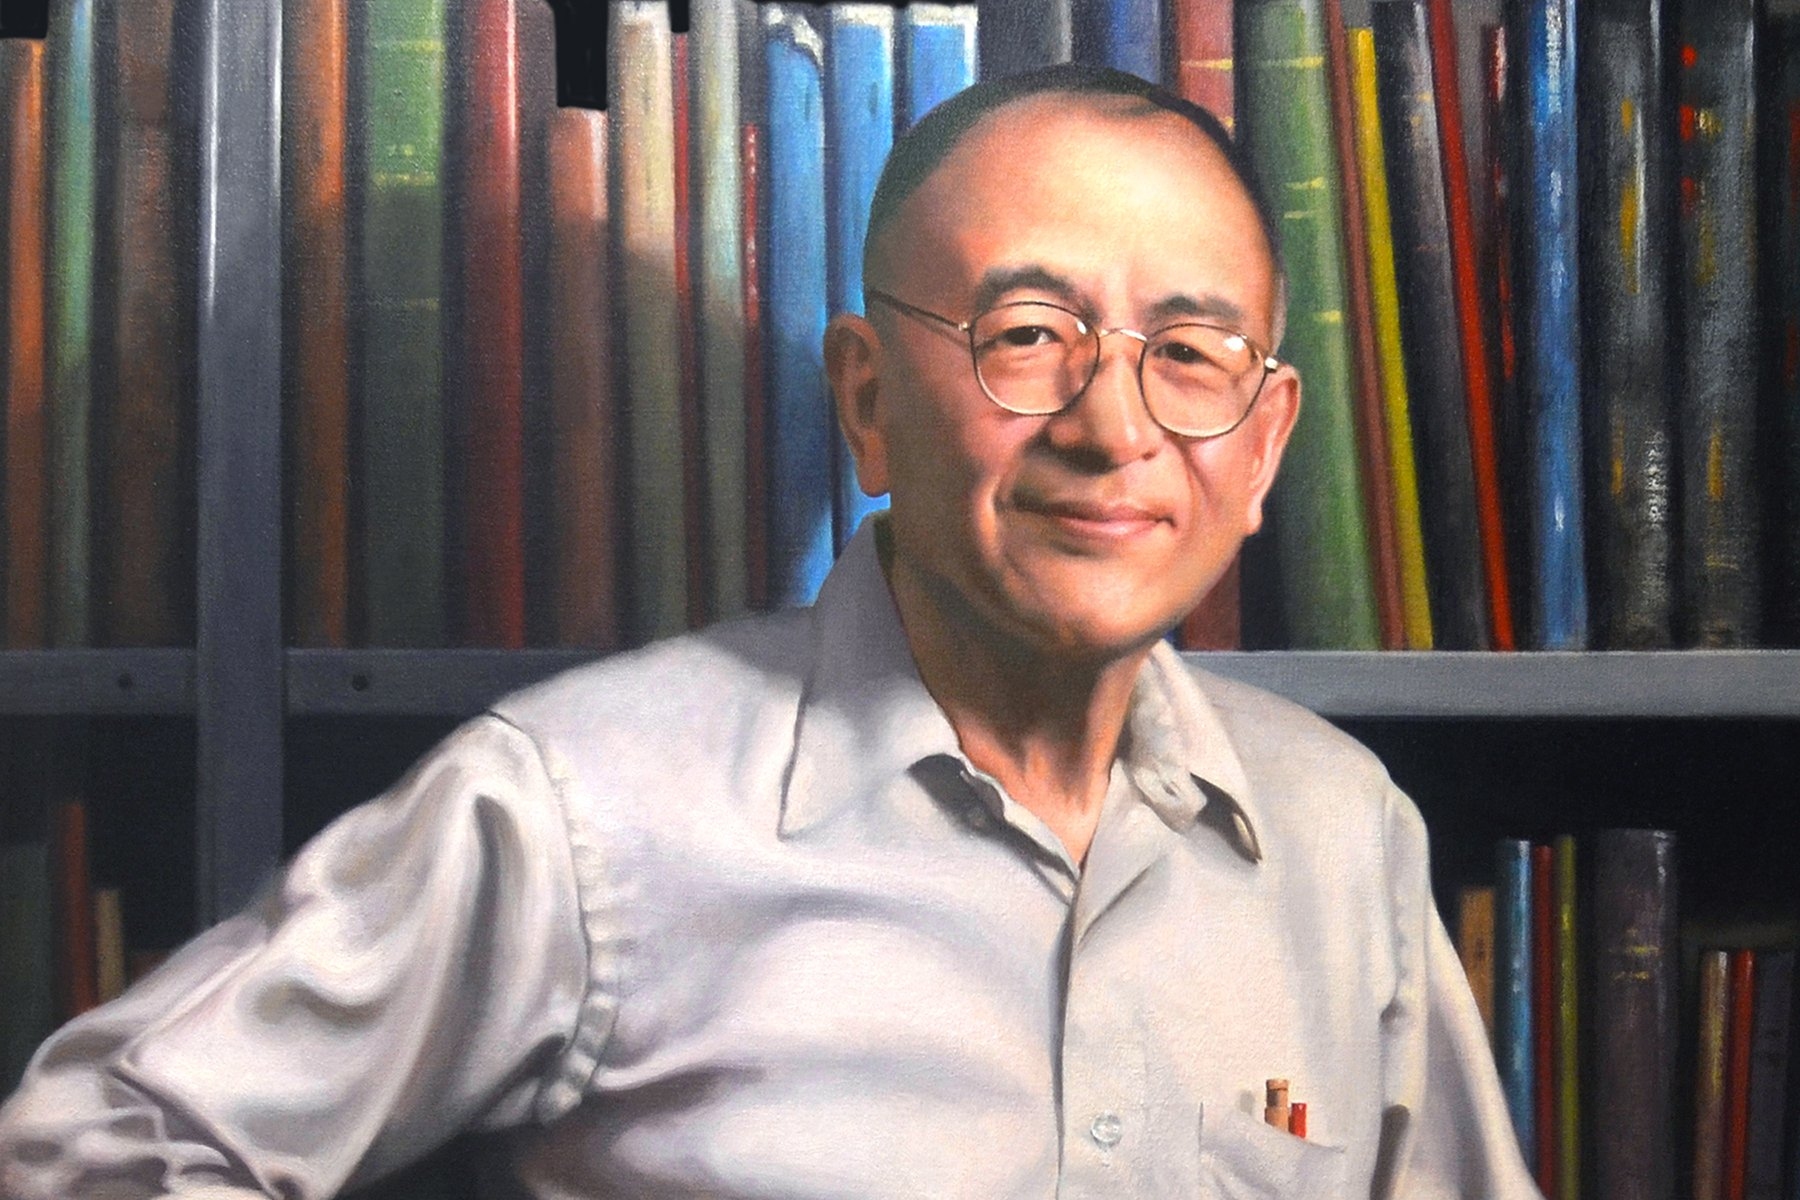 The phrase “being Kiang-ed” — having the experience of a long discussion about any range of topics with Nelson Yuan-sheng Kiang — became well known around MIT, Harvard, and Eaton-Peabody Laboratories.